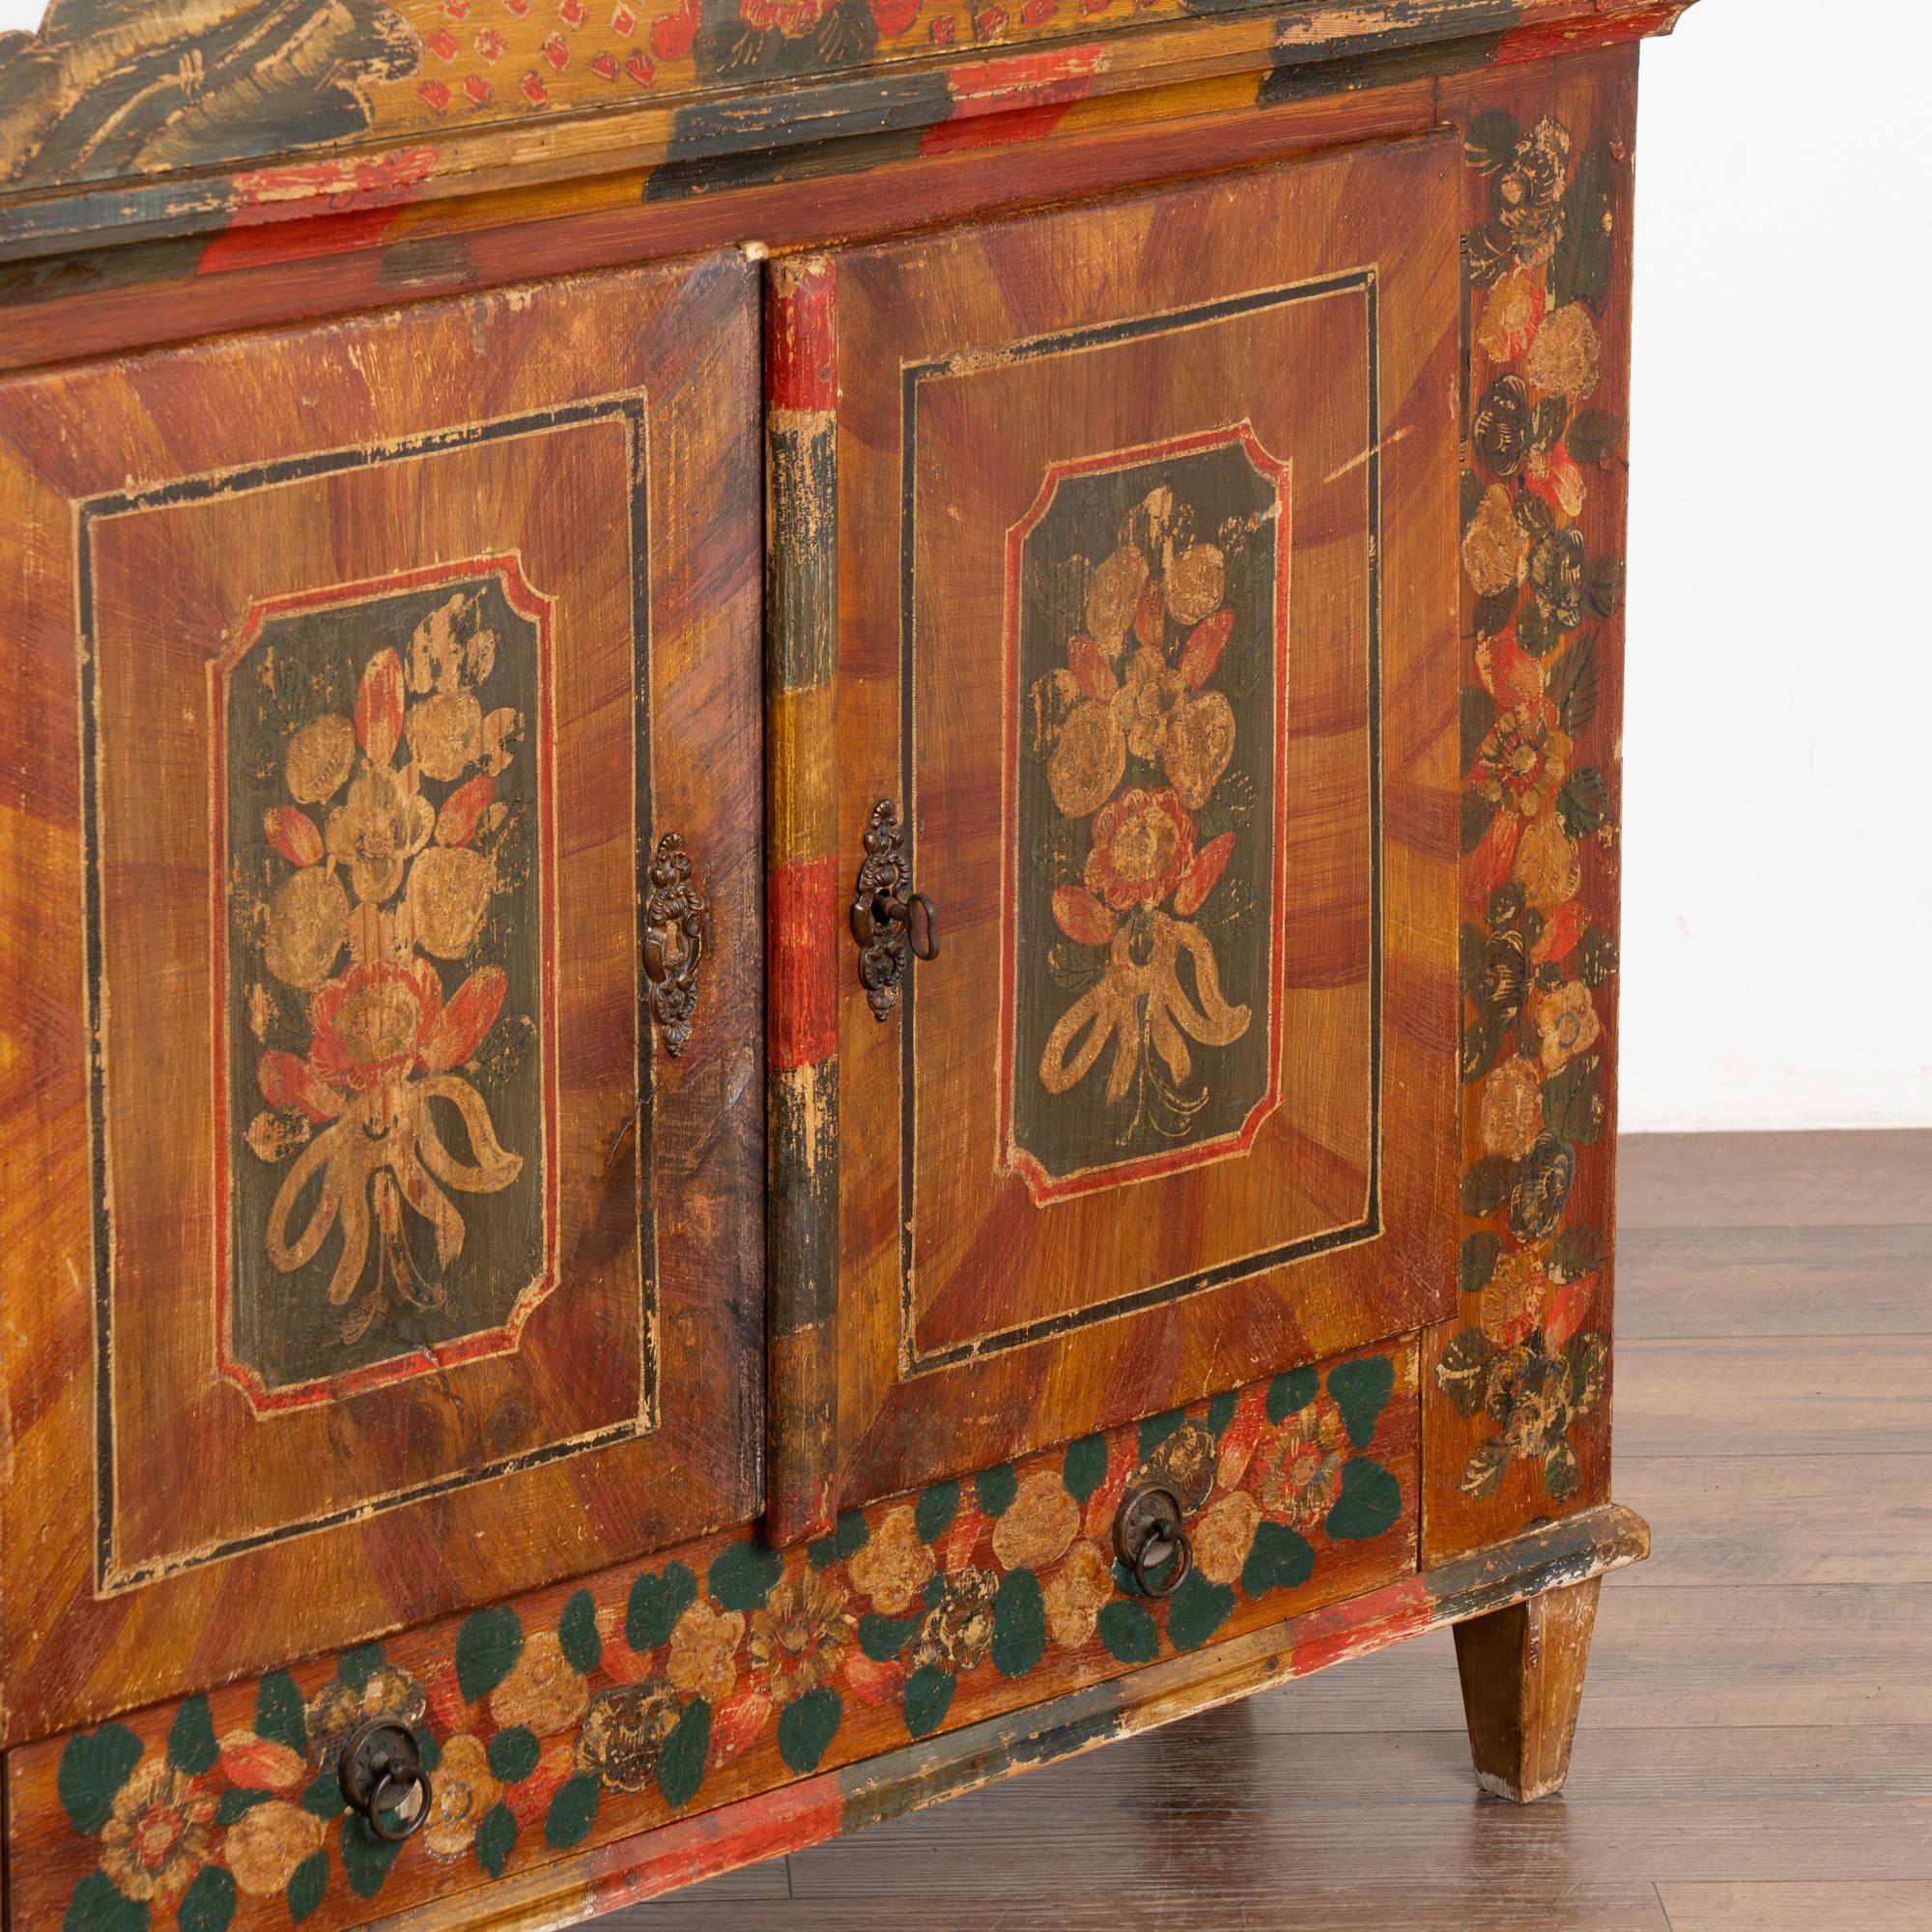 Original Hand Painted Small Cabinet, Austria circa 1800-20 In Good Condition For Sale In Round Top, TX